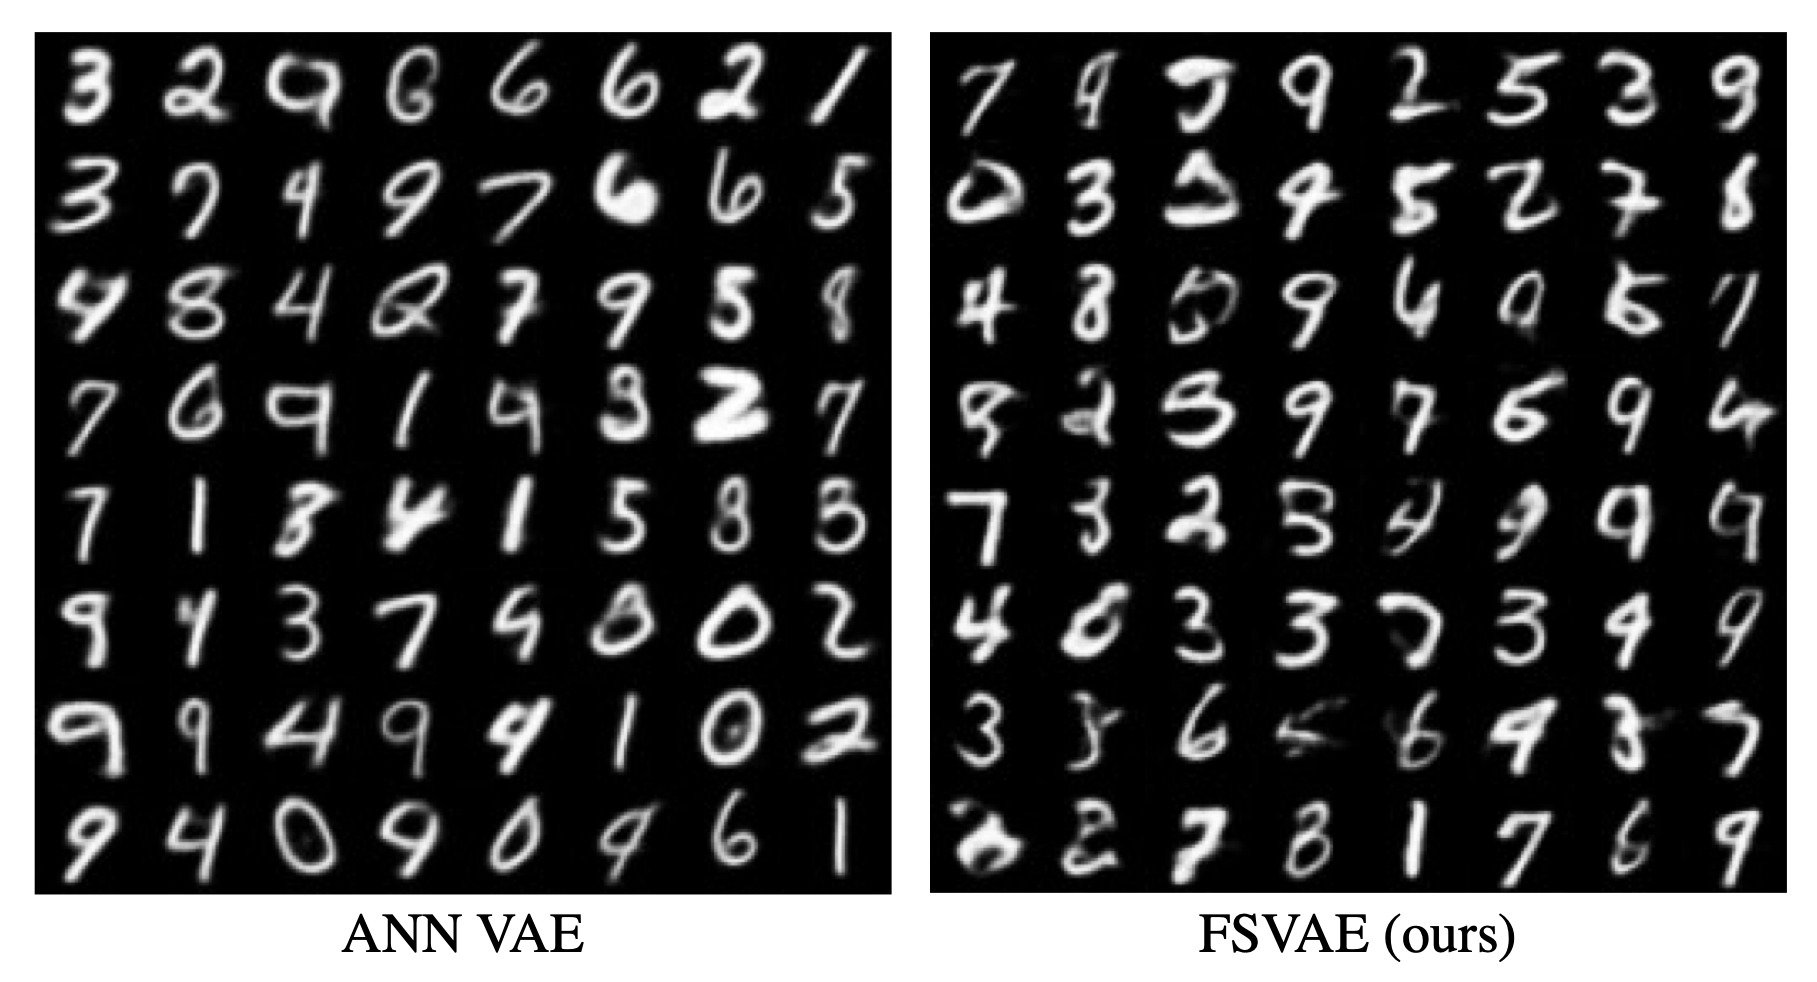 mnist_generated_images_appendix.png